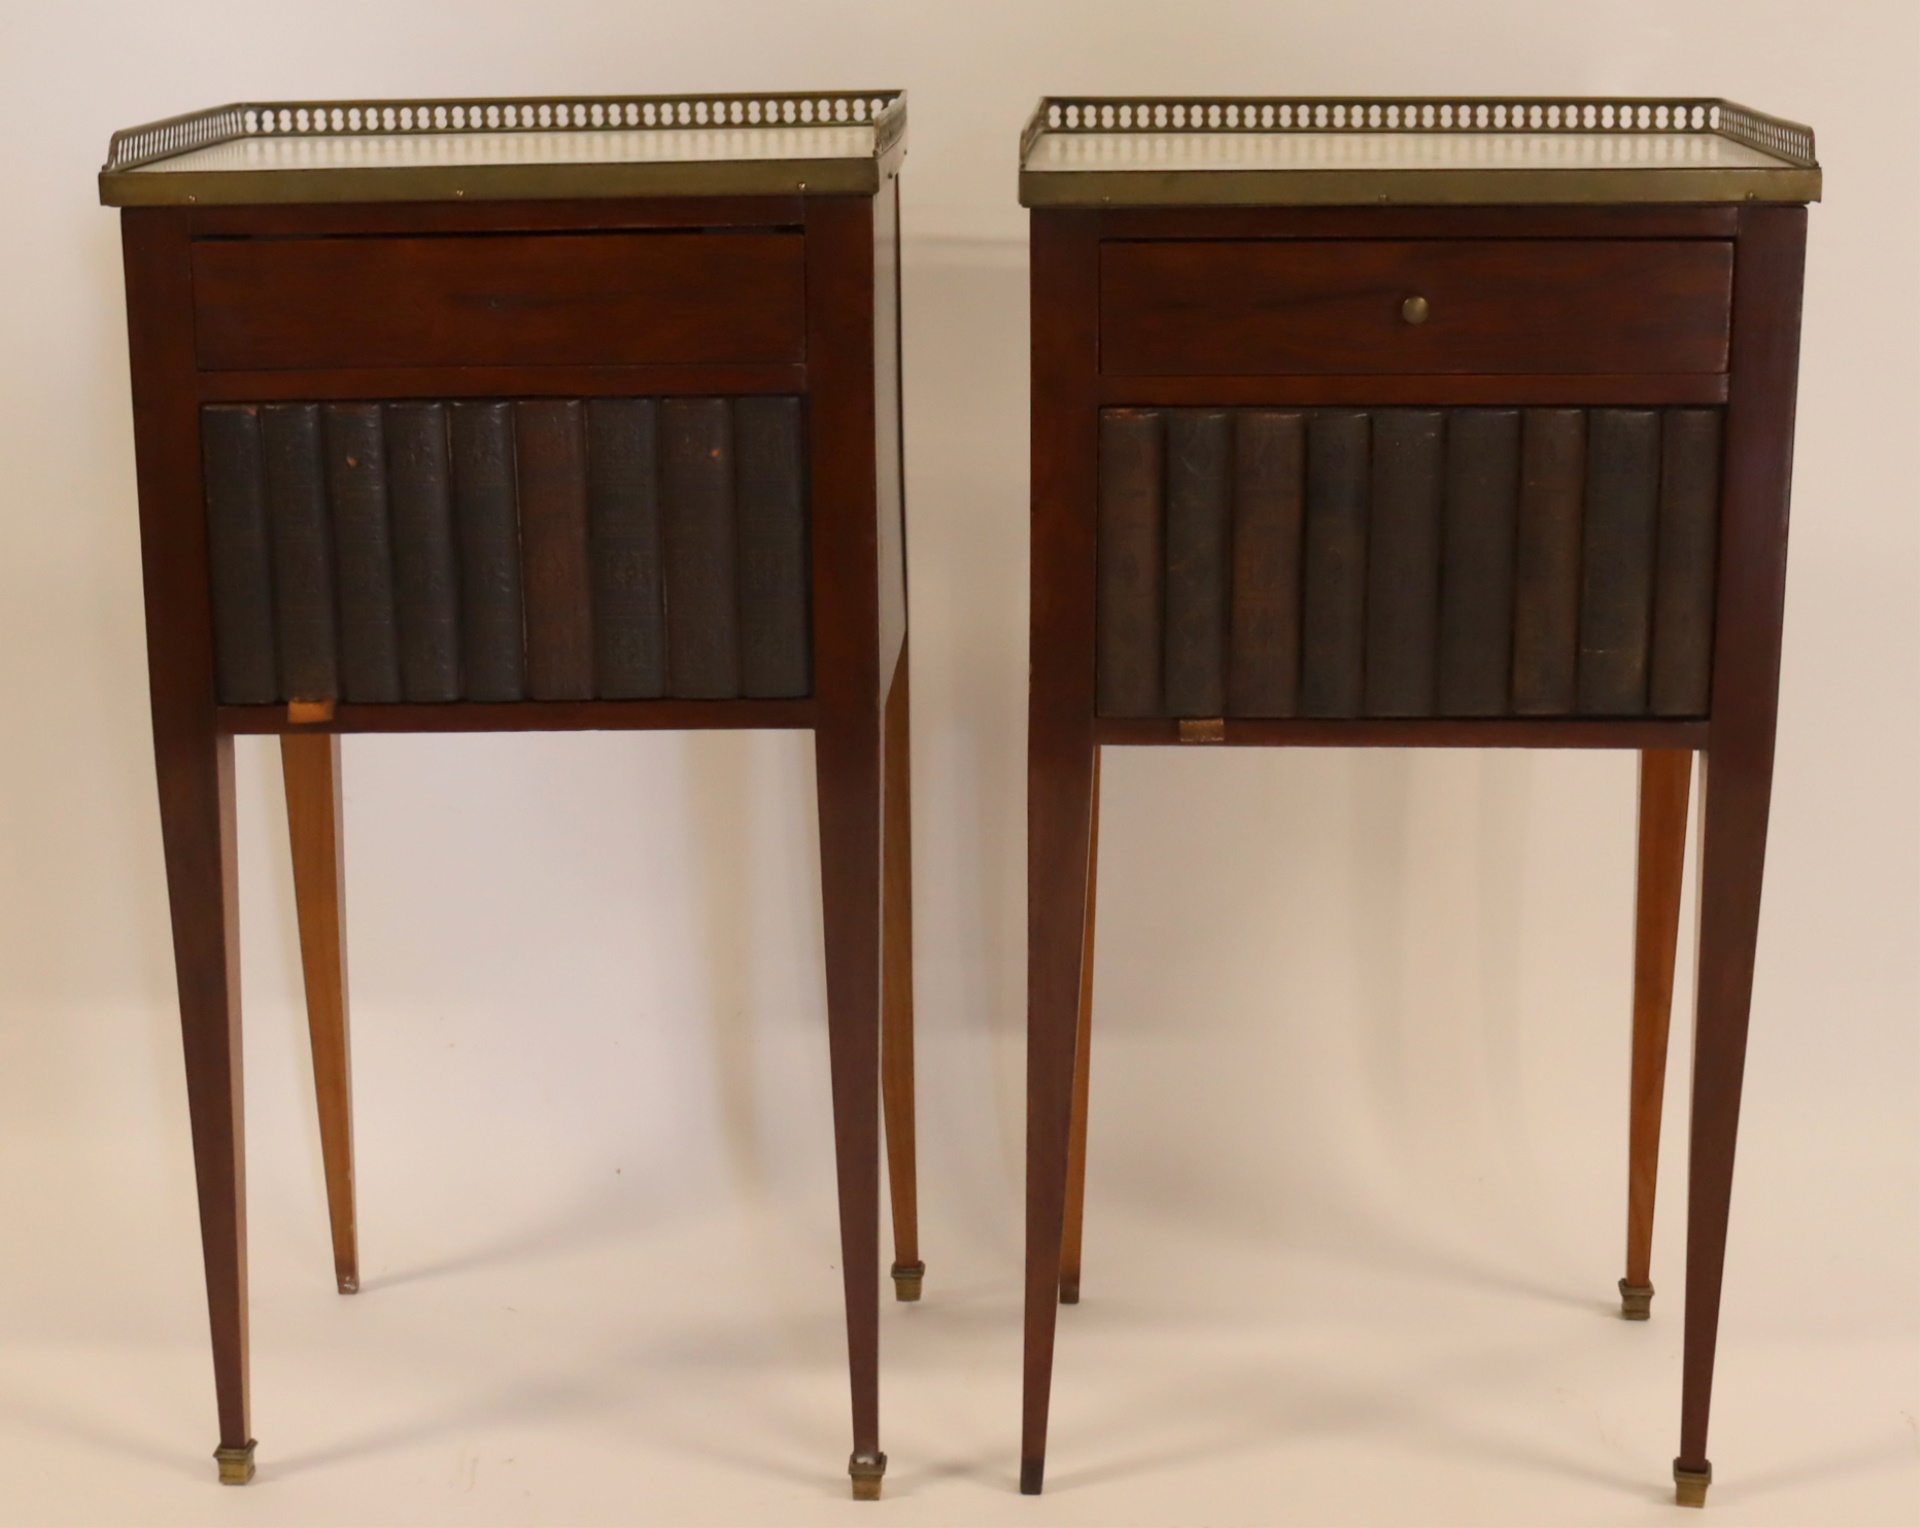 AN ANTIQUE PAIR OF LOUIS XV1 STYLE